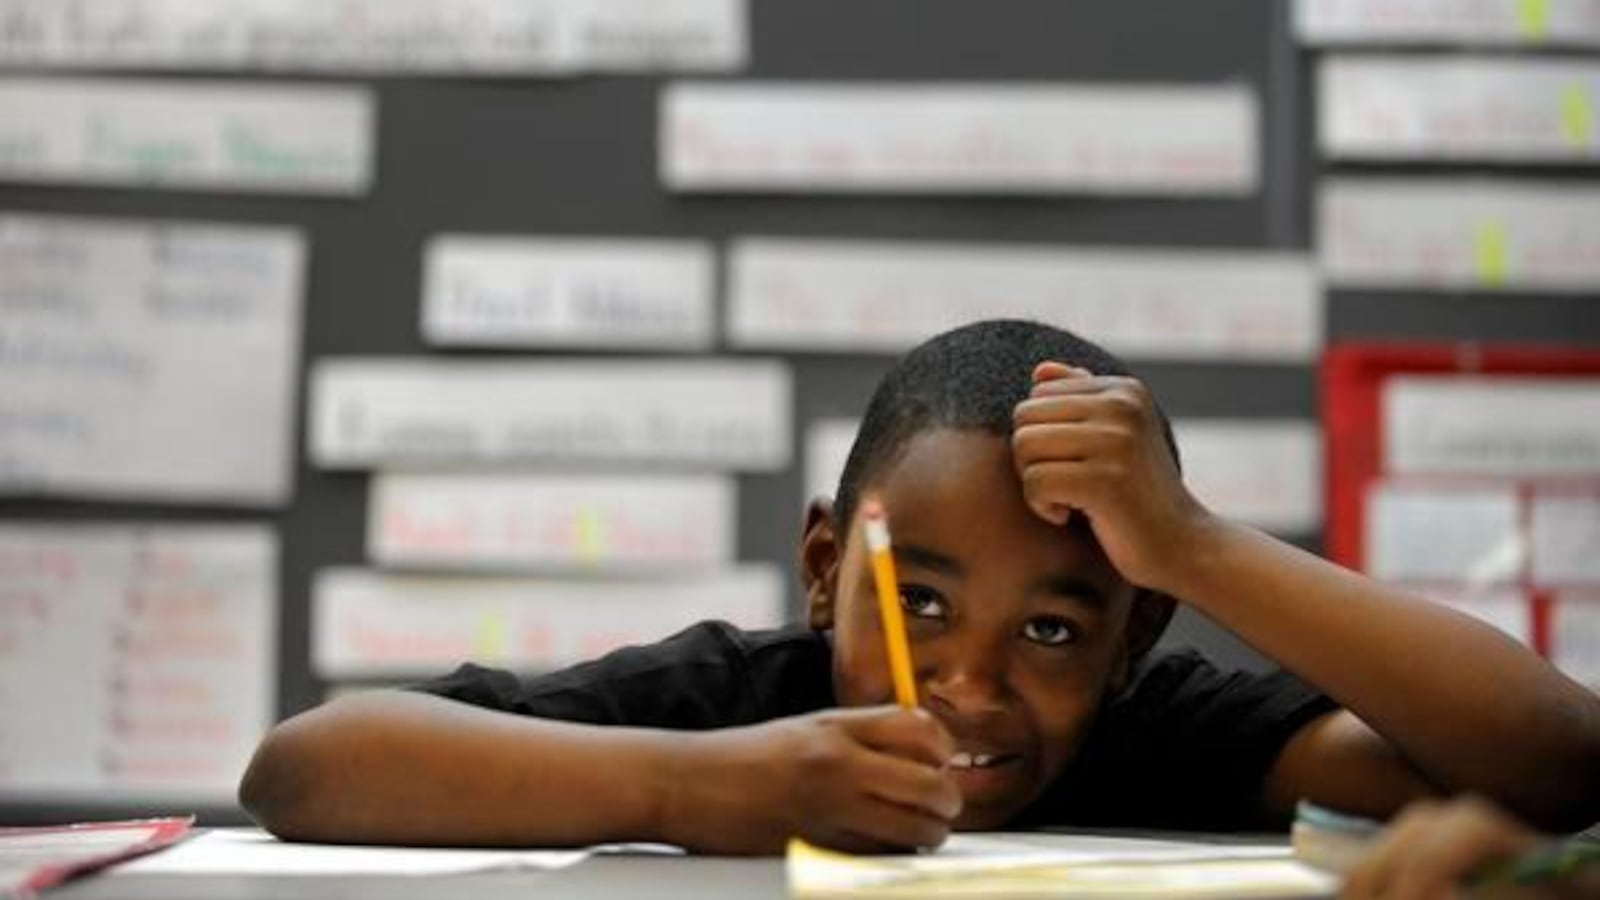 File photo of student at Marrama Elementary School in northeast Denver. (The Denver Post)